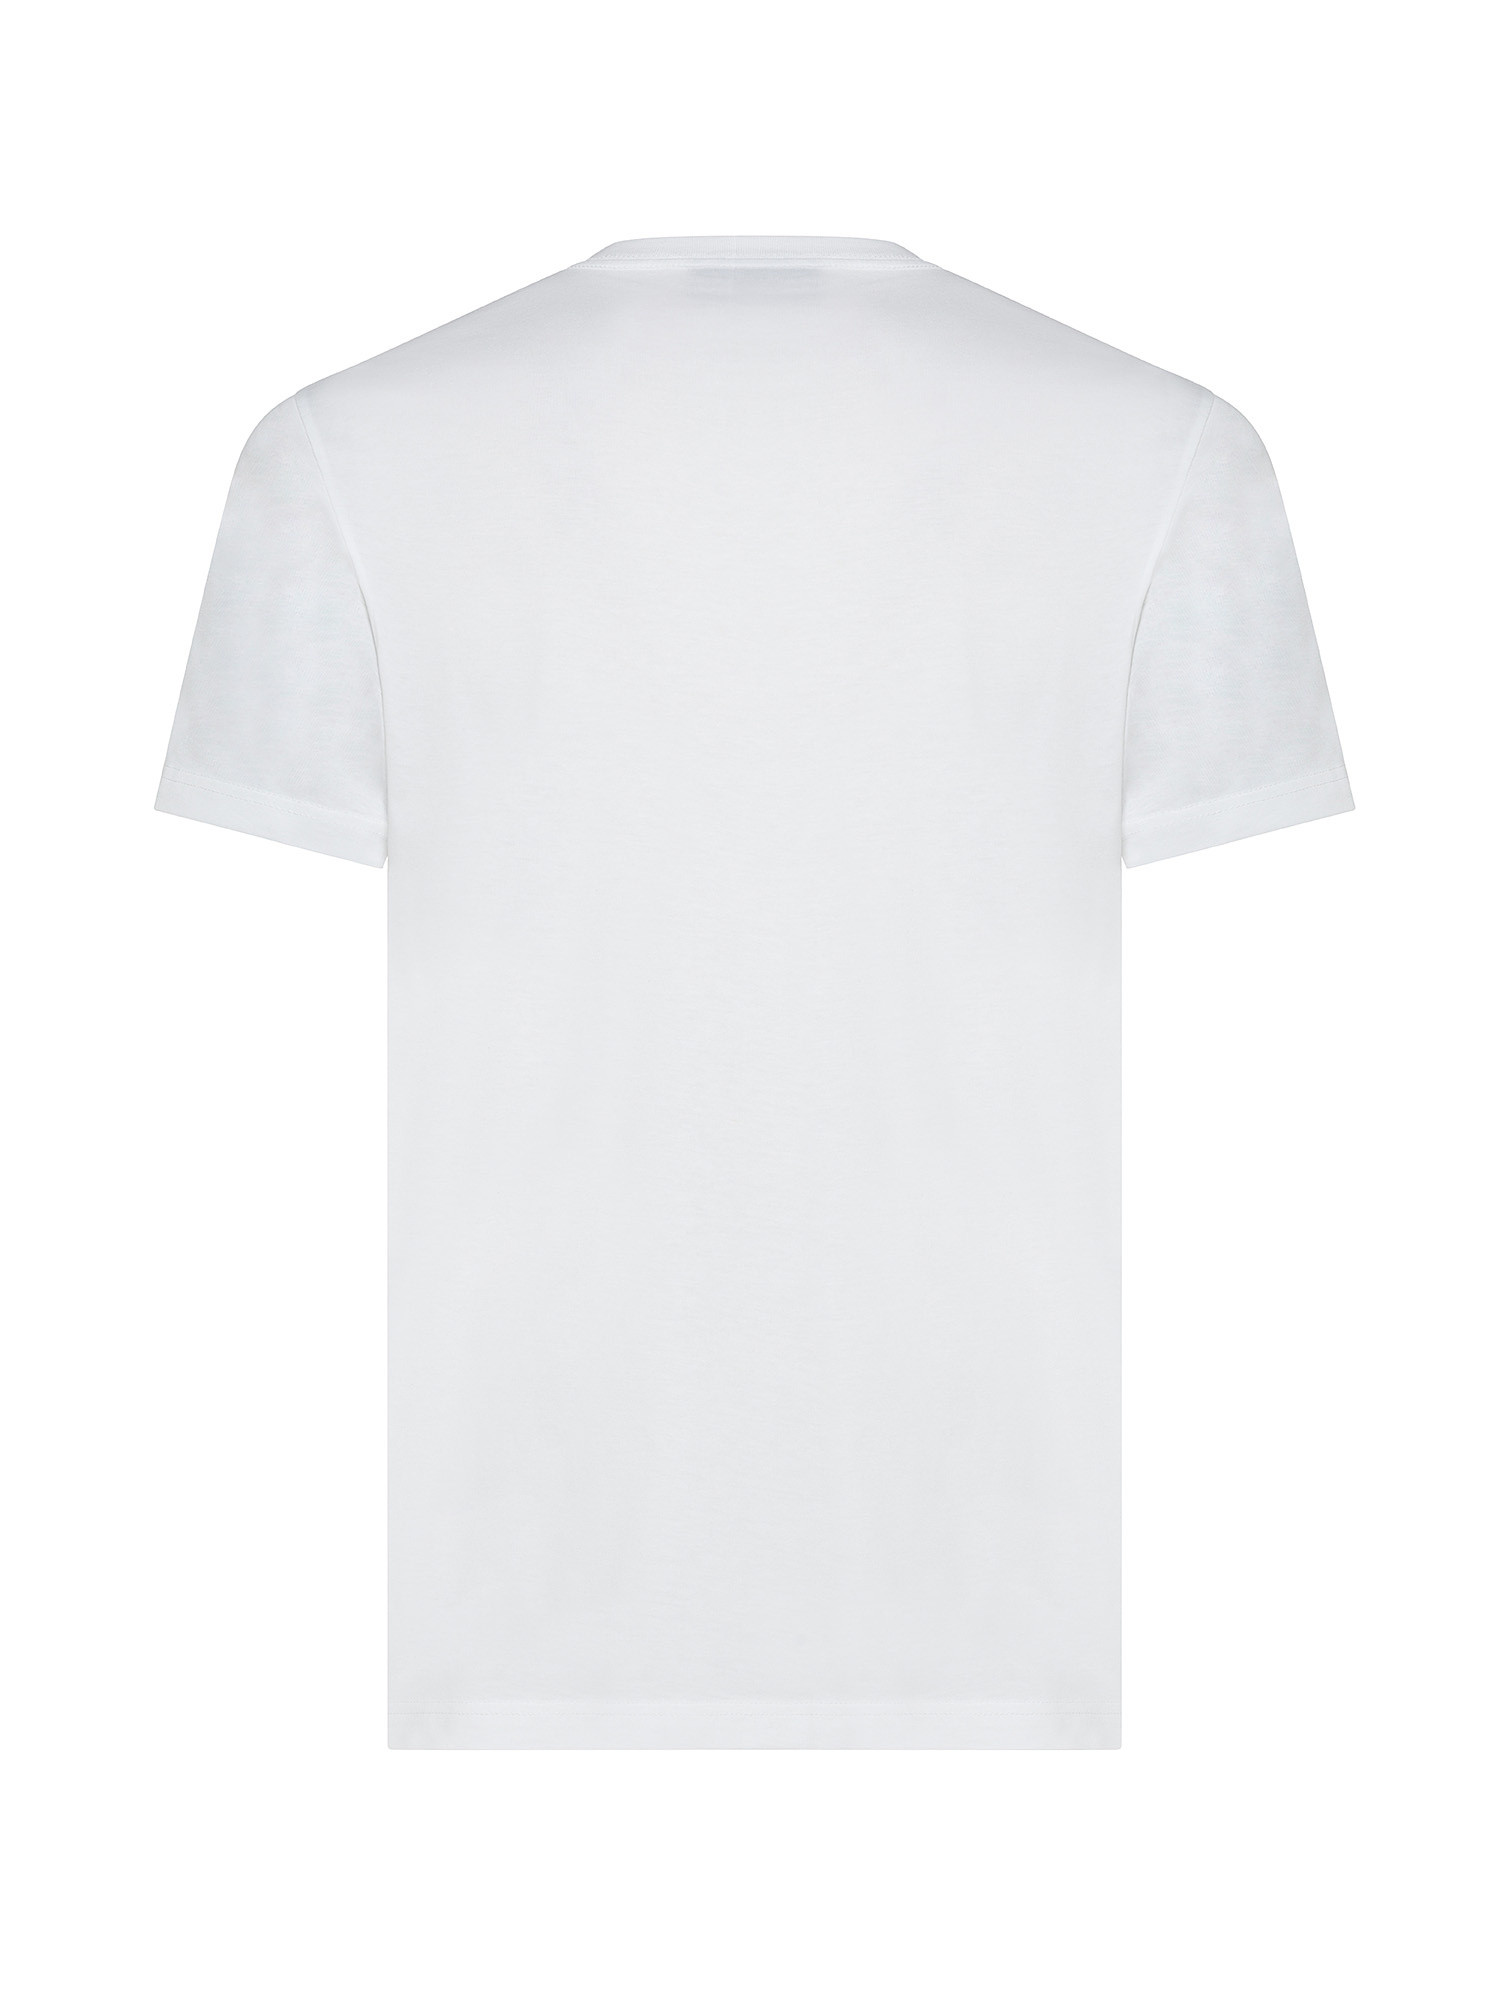 Paul Smith - T-shirt in cotone slim fit con stampa coniglio, Bianco, large image number 1